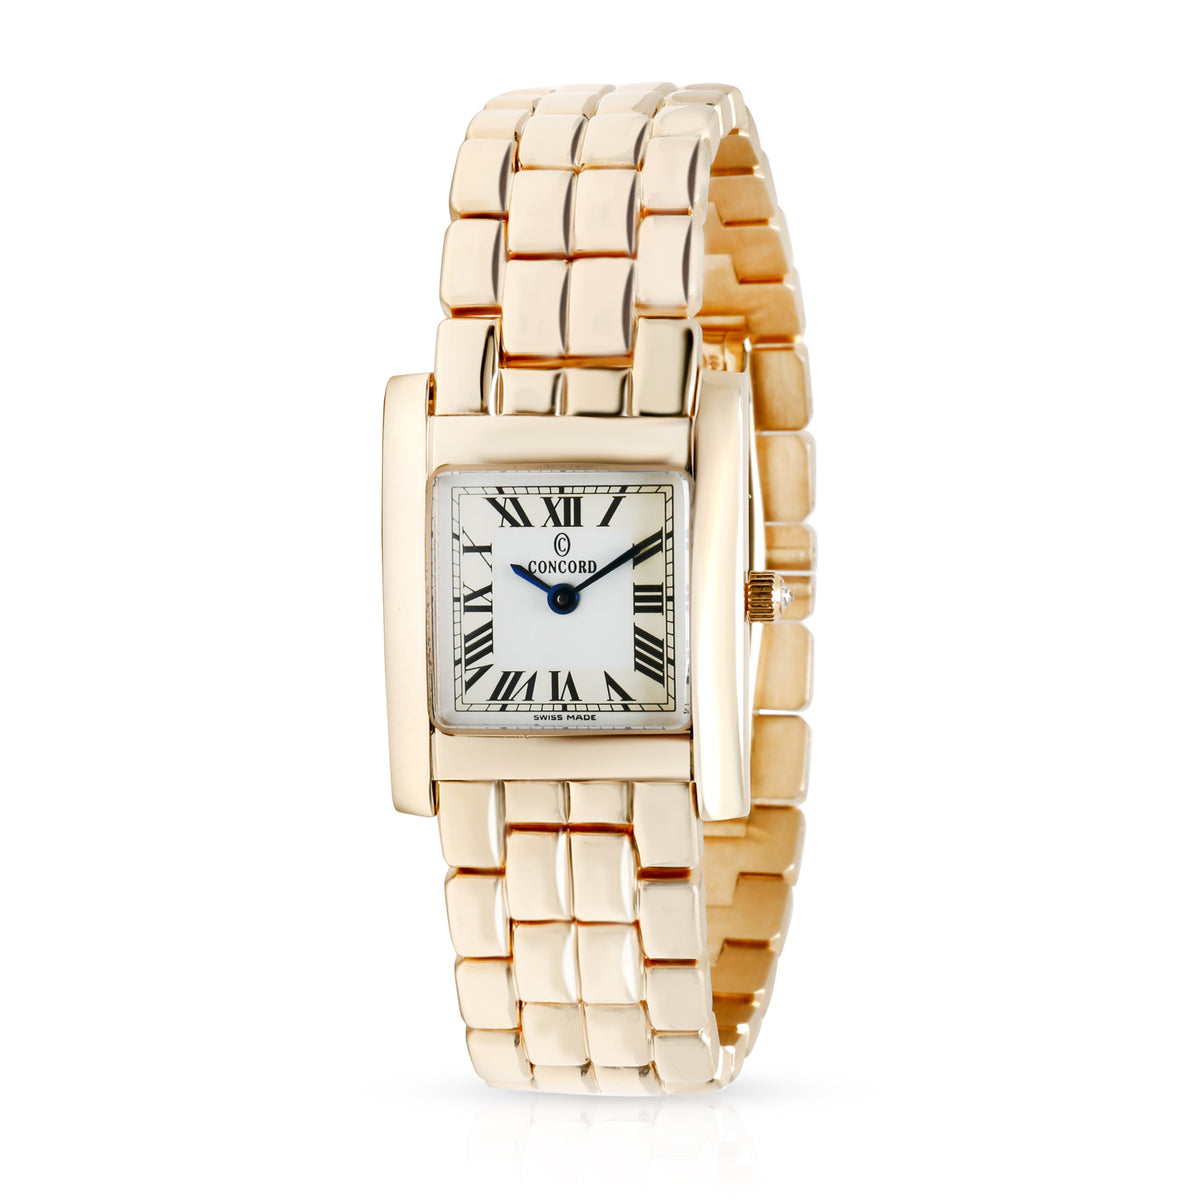 Concord La Tour 28-25-648 Women's Watch in 14kt Yellow Gold